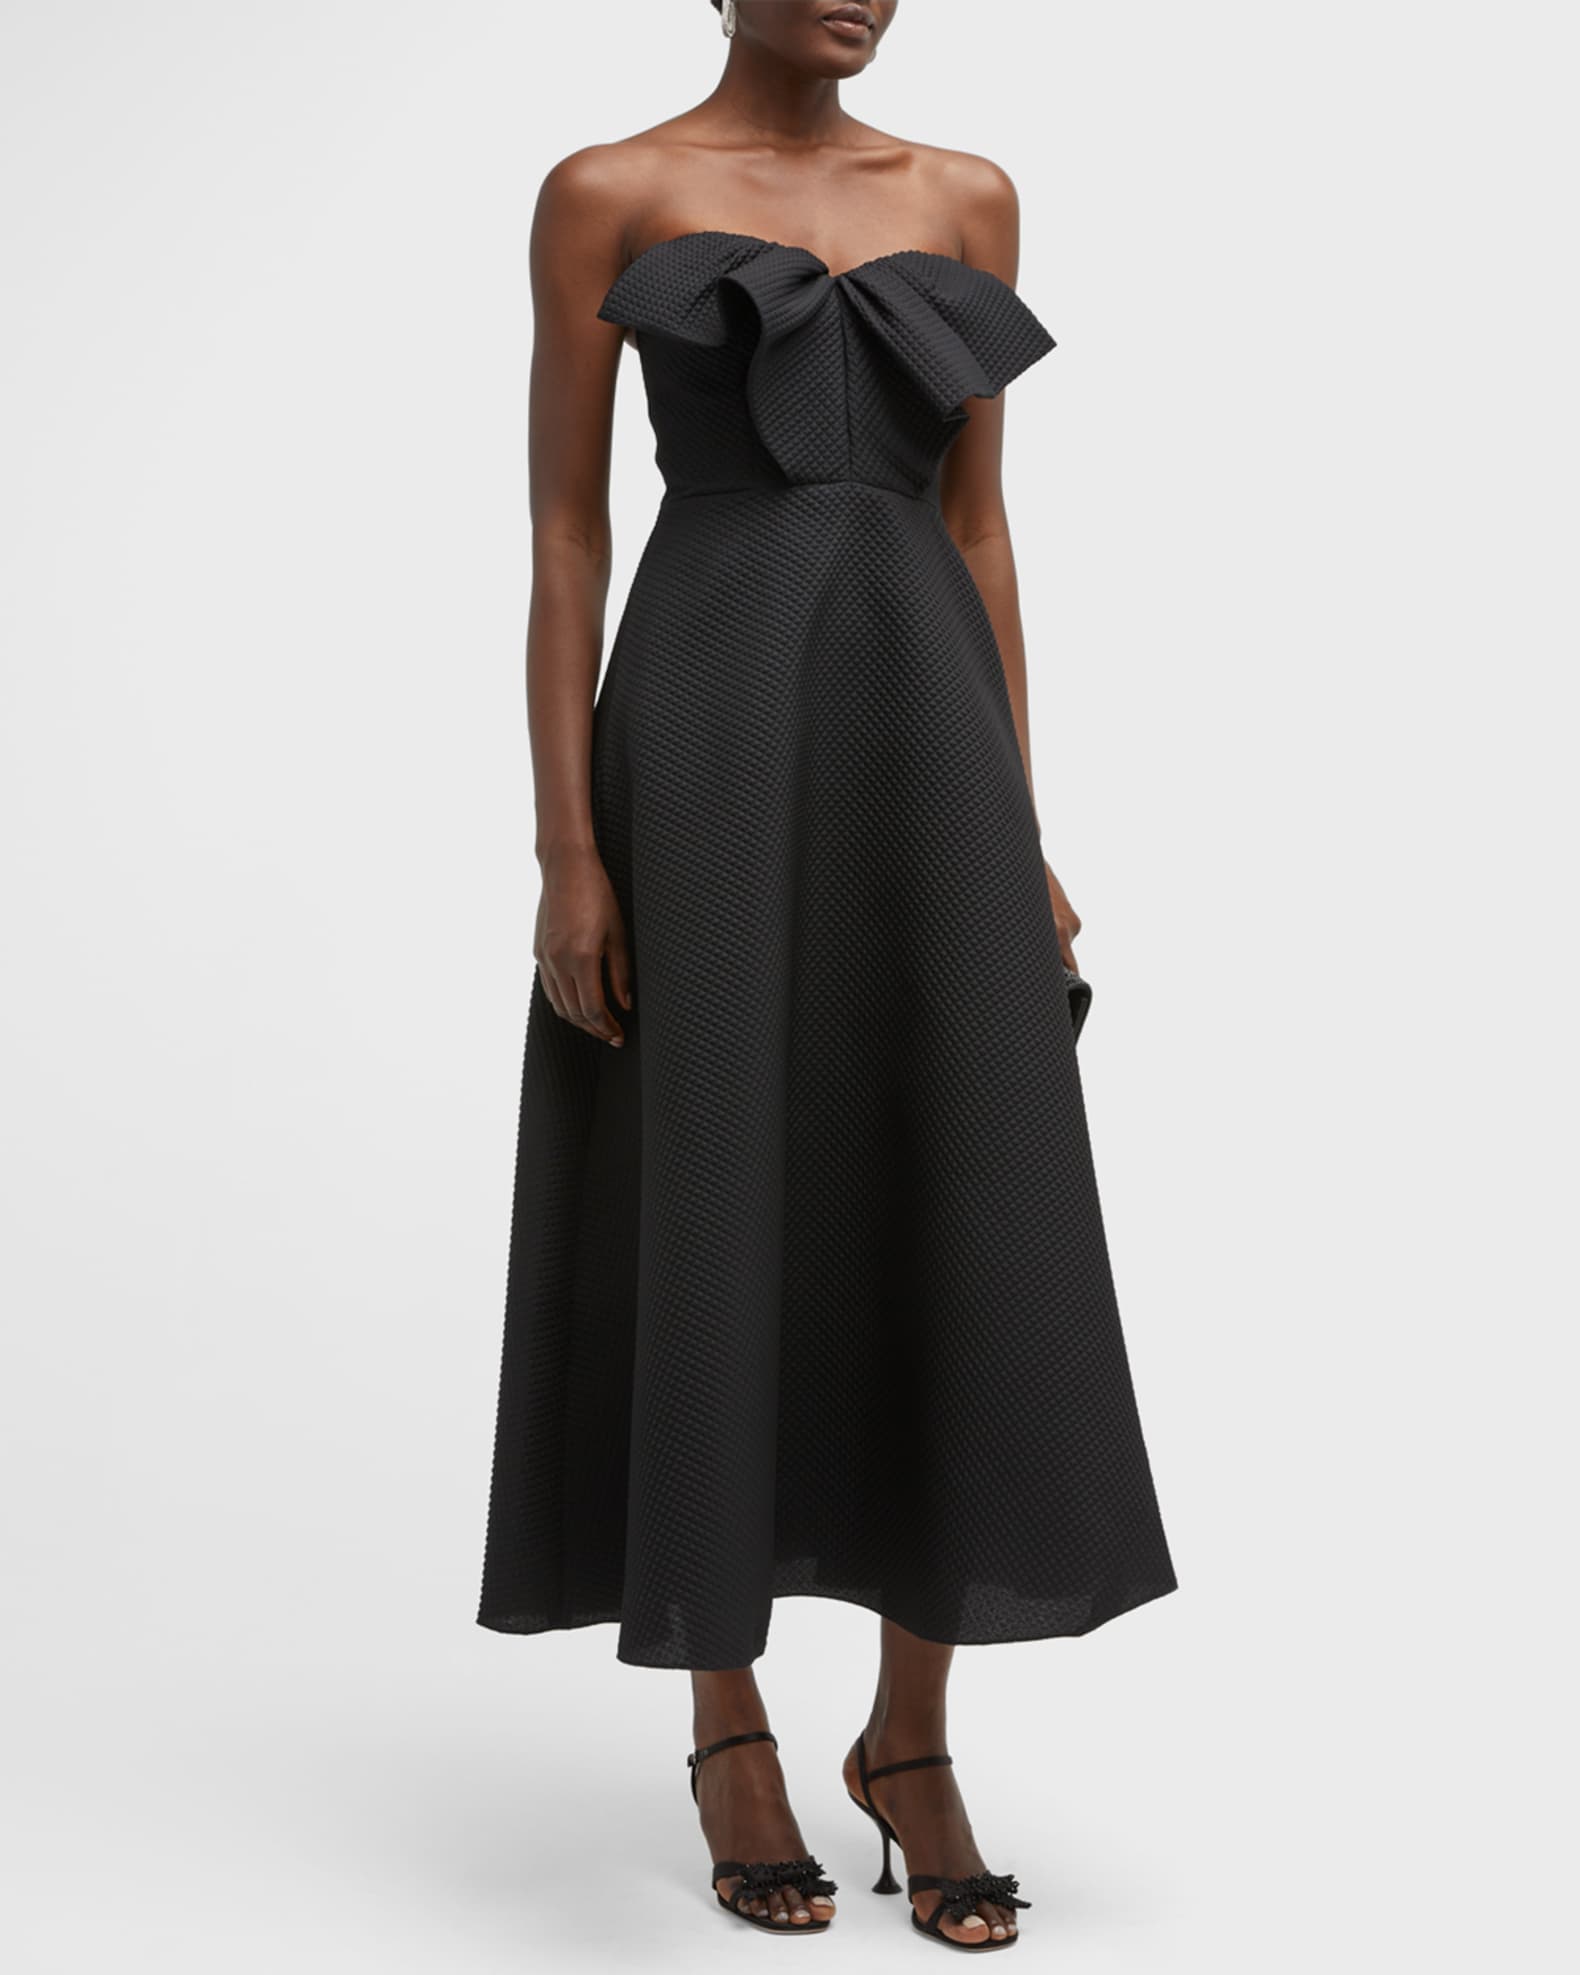 Lela Rose Strapless Bow-Front Quilted Midi Dress | Neiman Marcus